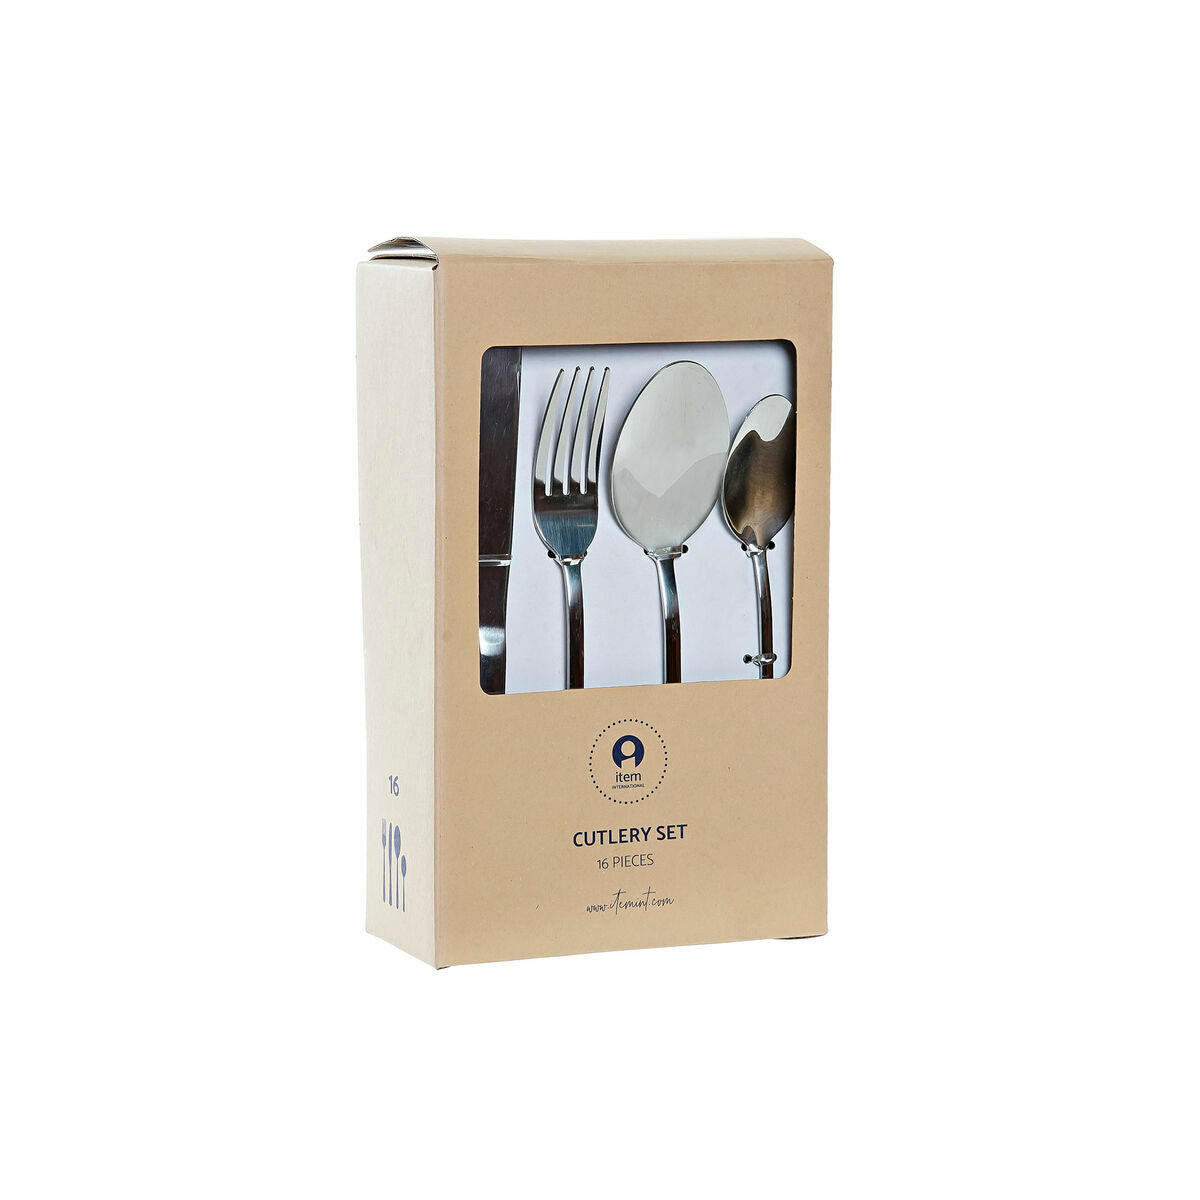 Cutlery DKD Home Decor Blue Silver Black Stainless steel 16 Pieces